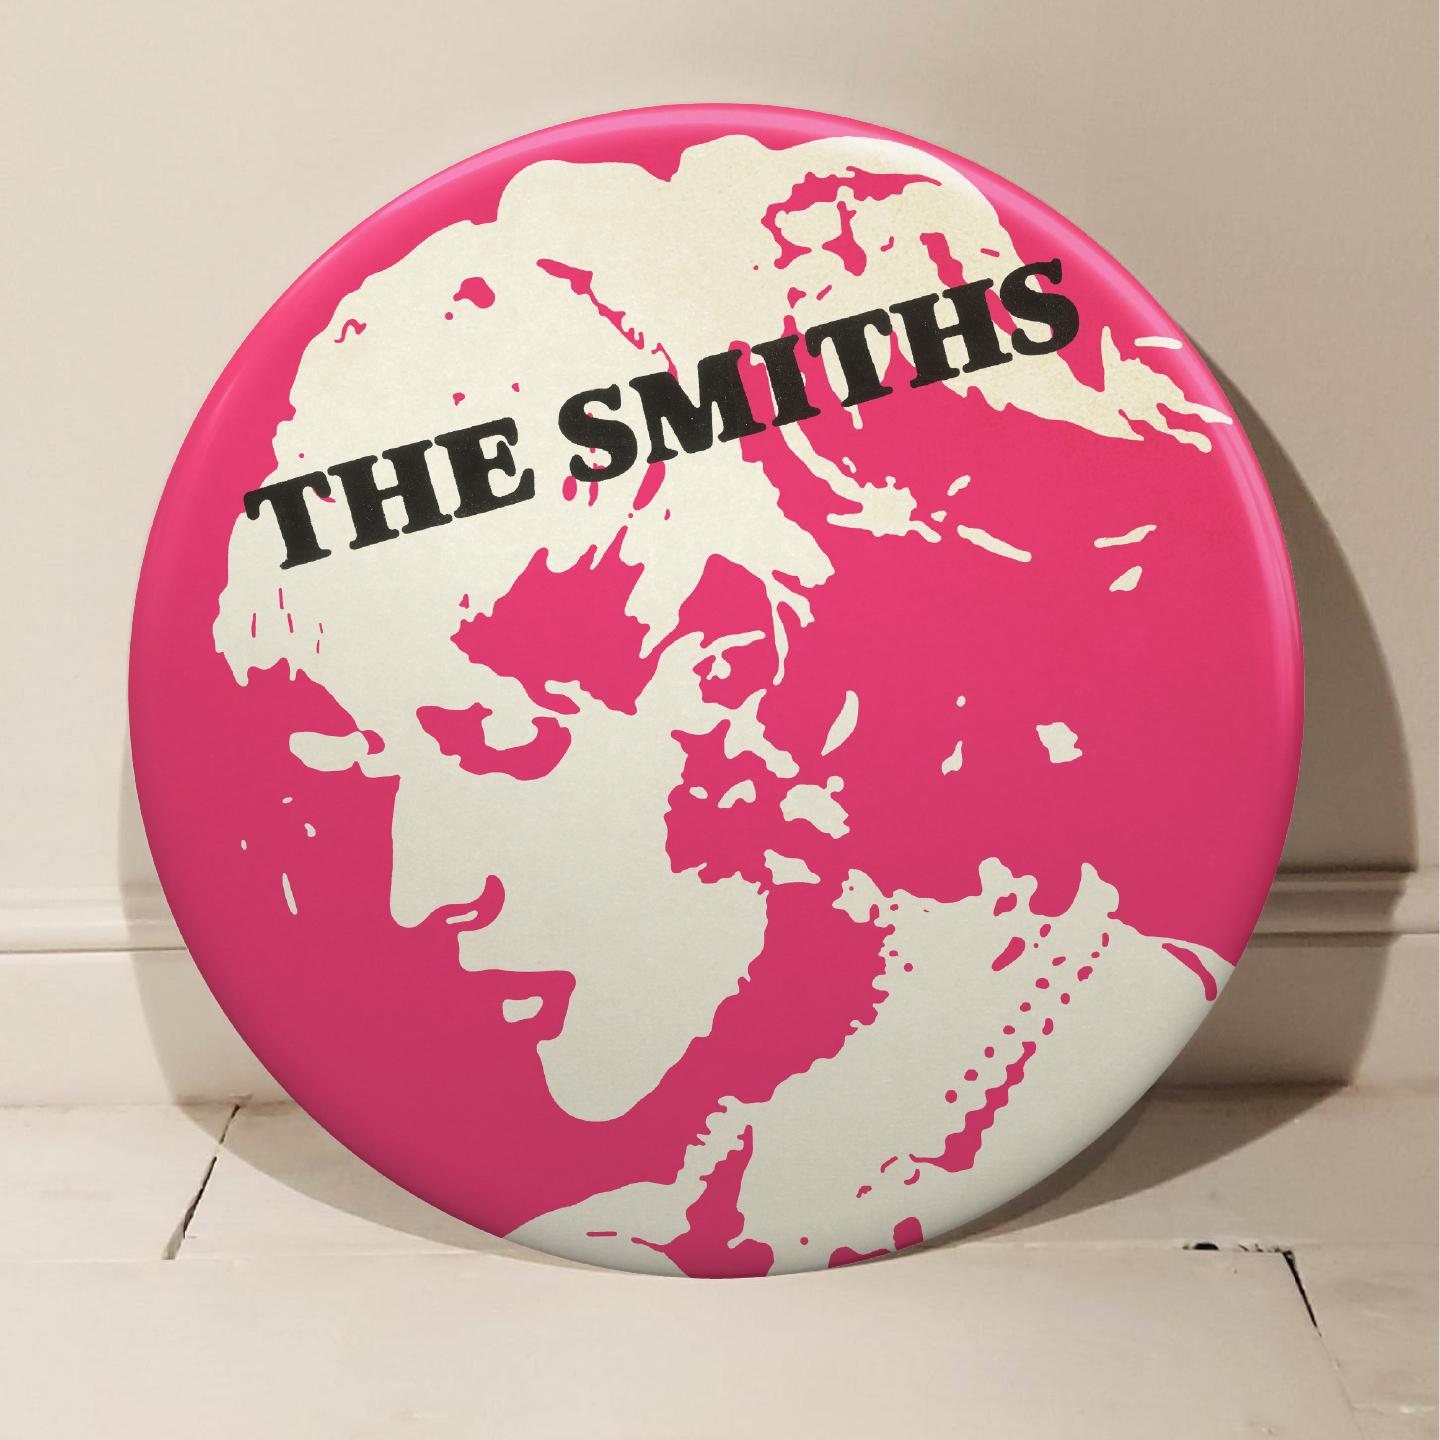 The Smiths "Sheila Take A Bow" Giant Handmade 3D Vintage Button - Mixed Media Art by Tony Dennis